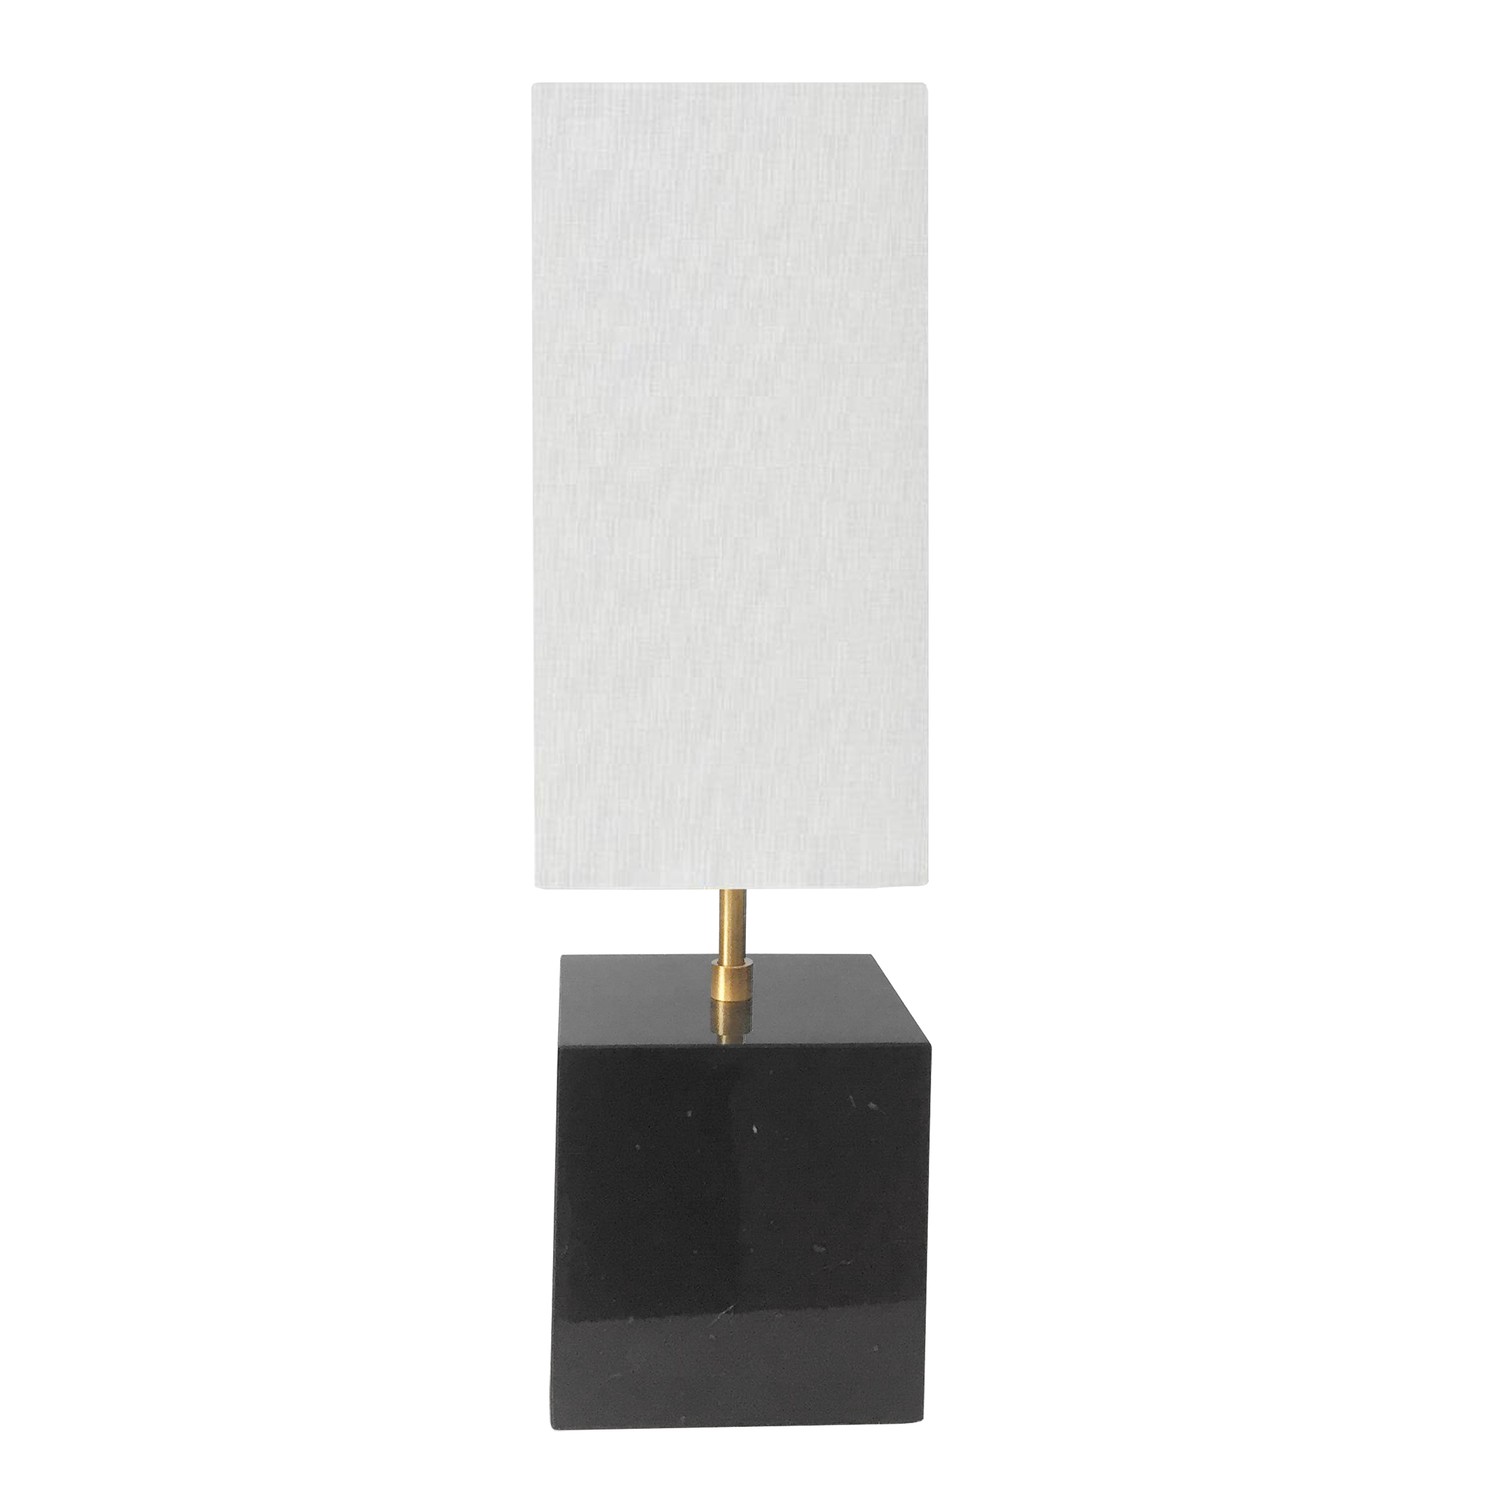 1 Light Incandescent Table Lamp, Black / Aged Brass White Shade